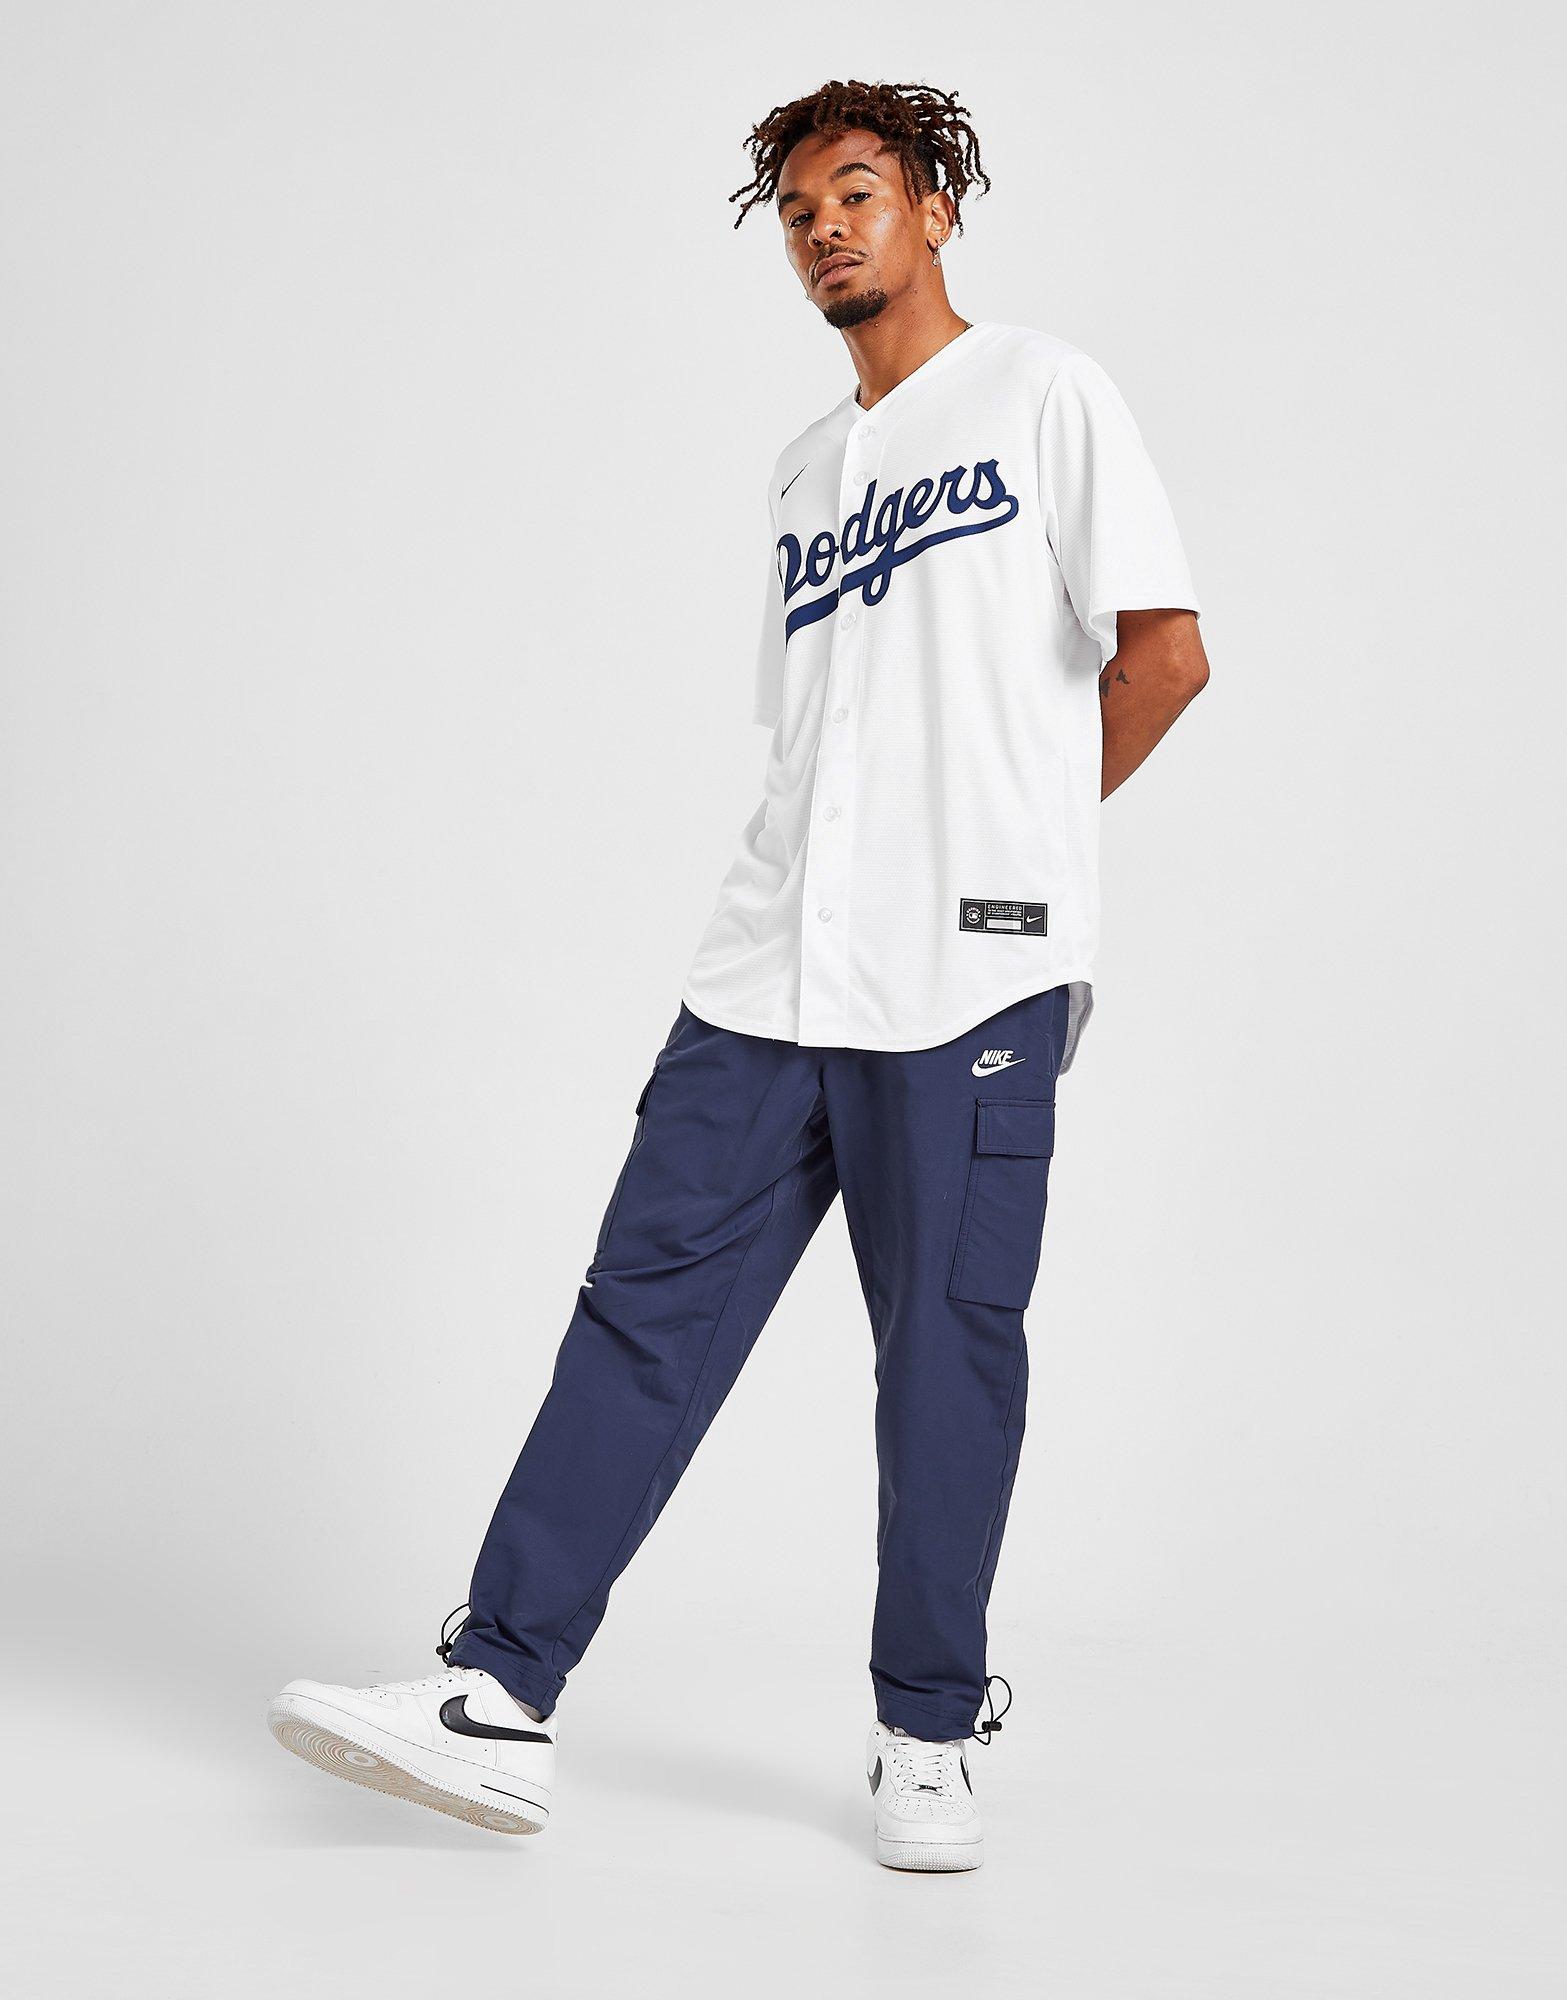 30303 Nike LOS ANGELES DODGERS 100% REAL Baseball Jersey White NWT